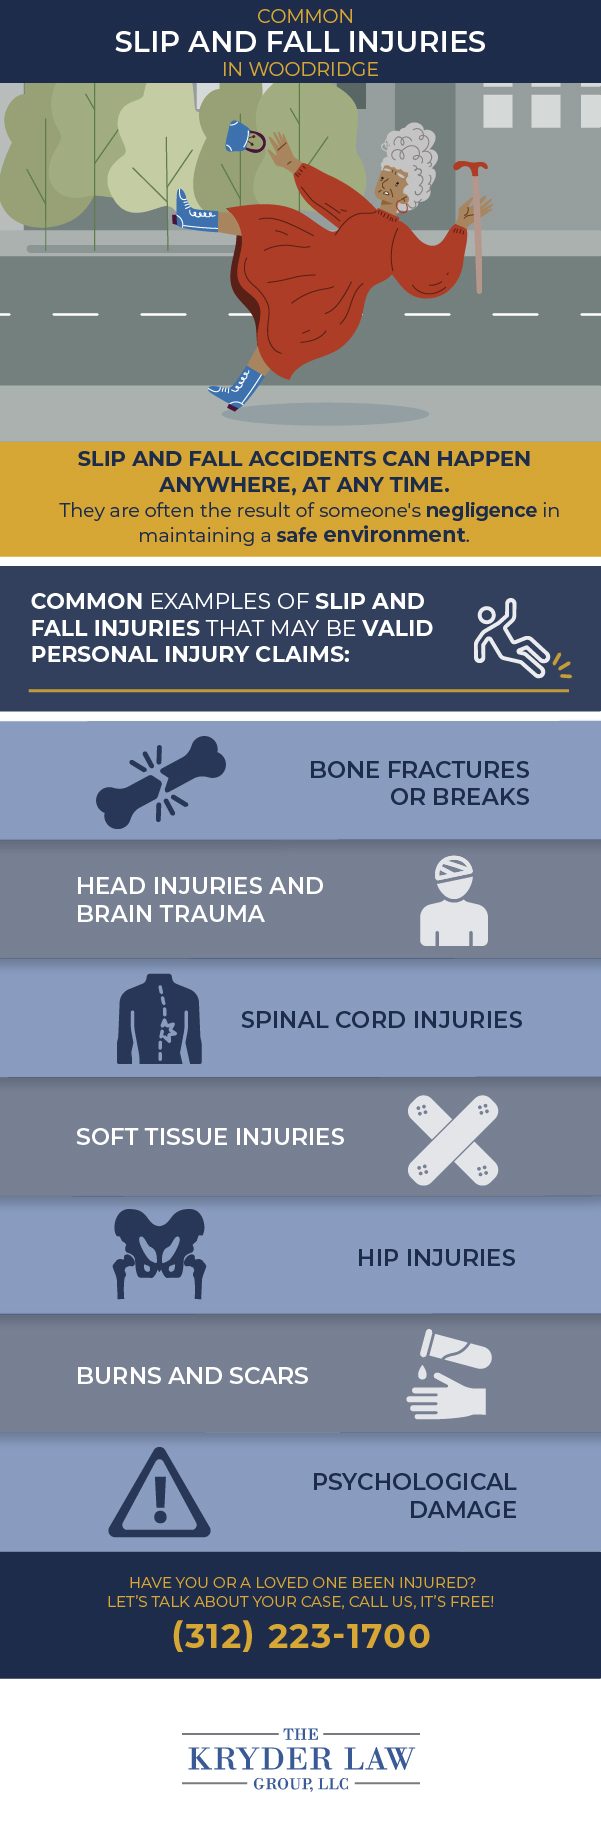 The Benefits of Hiring a Woodridge Slip and Fall Injury Lawyer Infographic